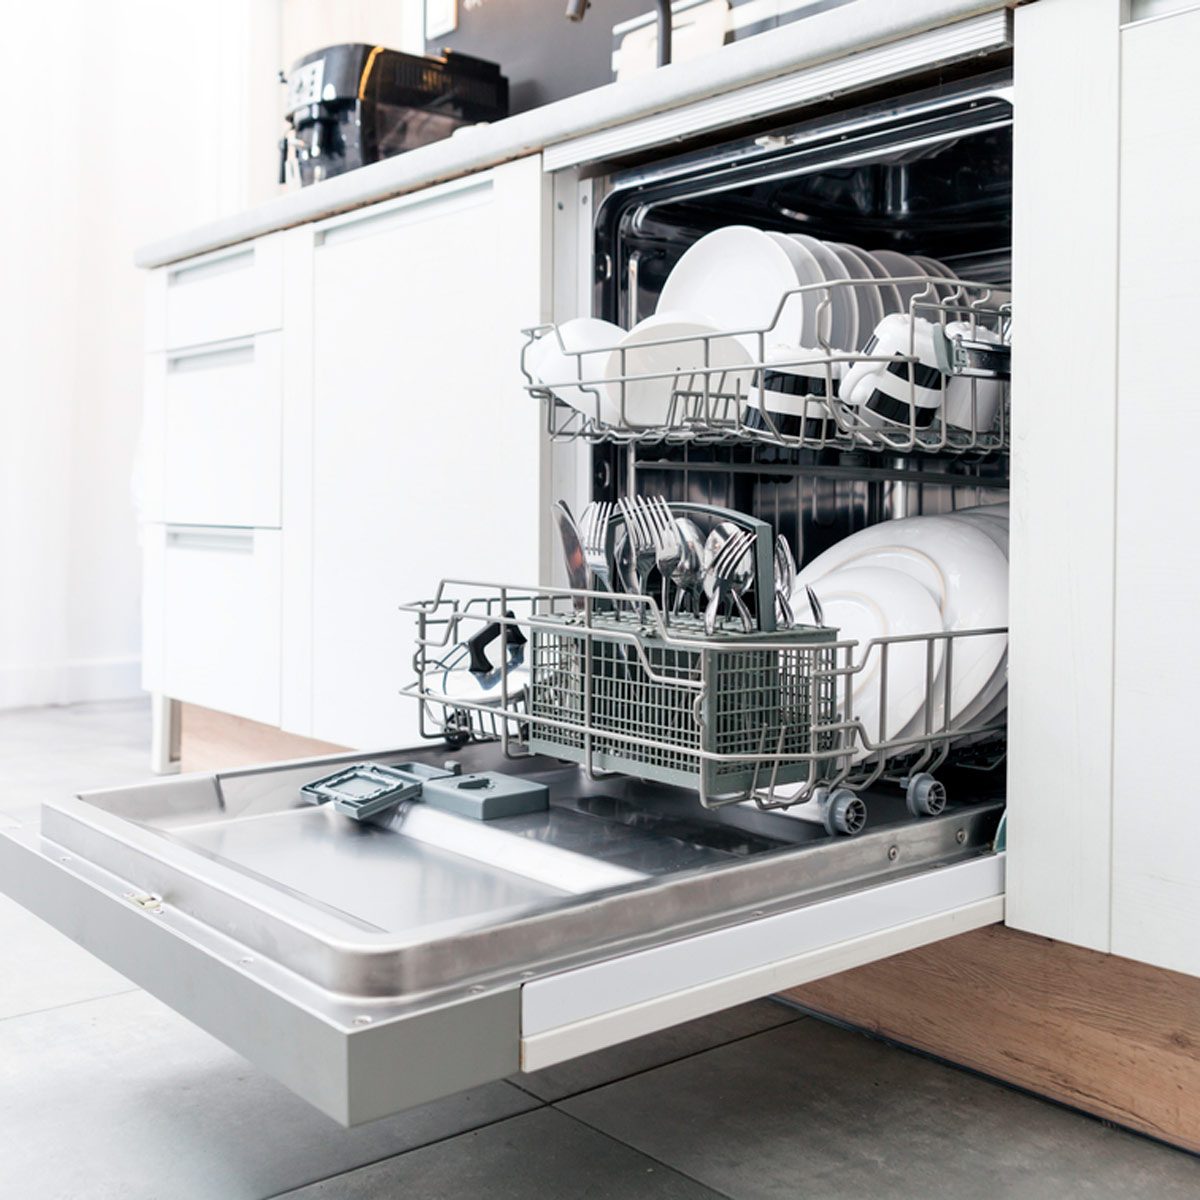 How to Clean a Dishwasher With Vinegar